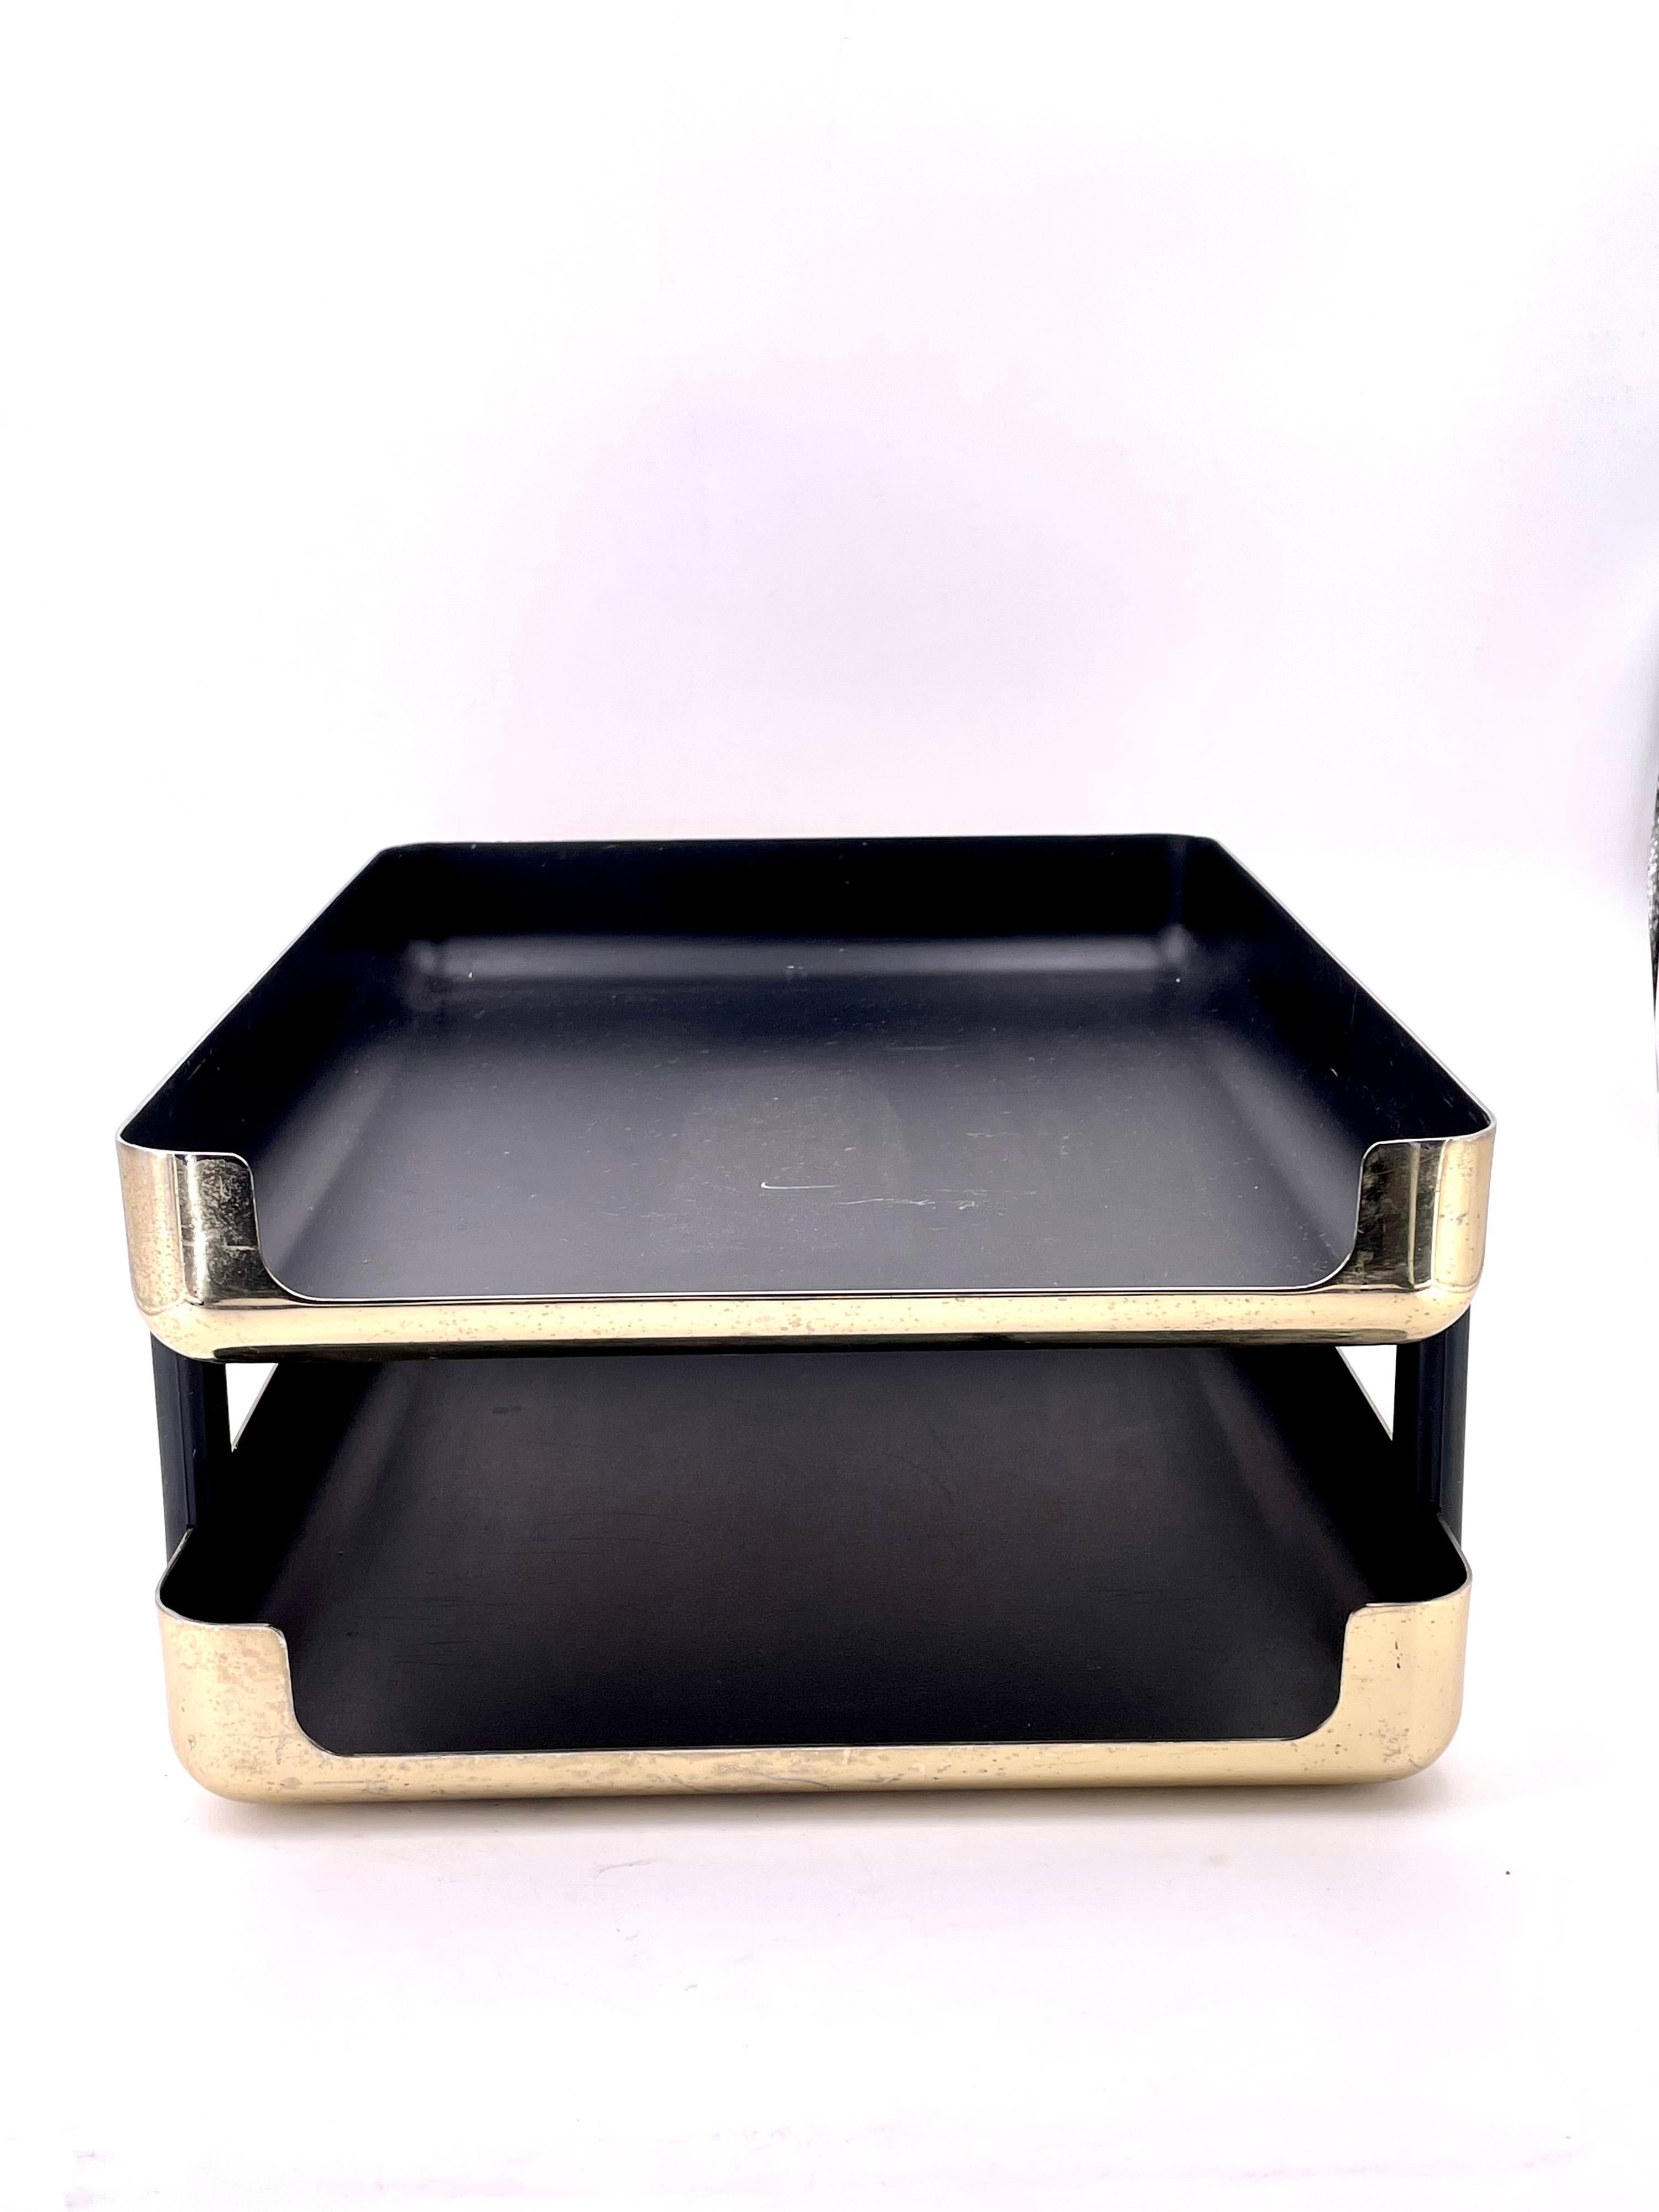 Double letter tray in polished brass finish with black enamel lining by emphasis 6000. Very nice accent to any executive's desk! California design.